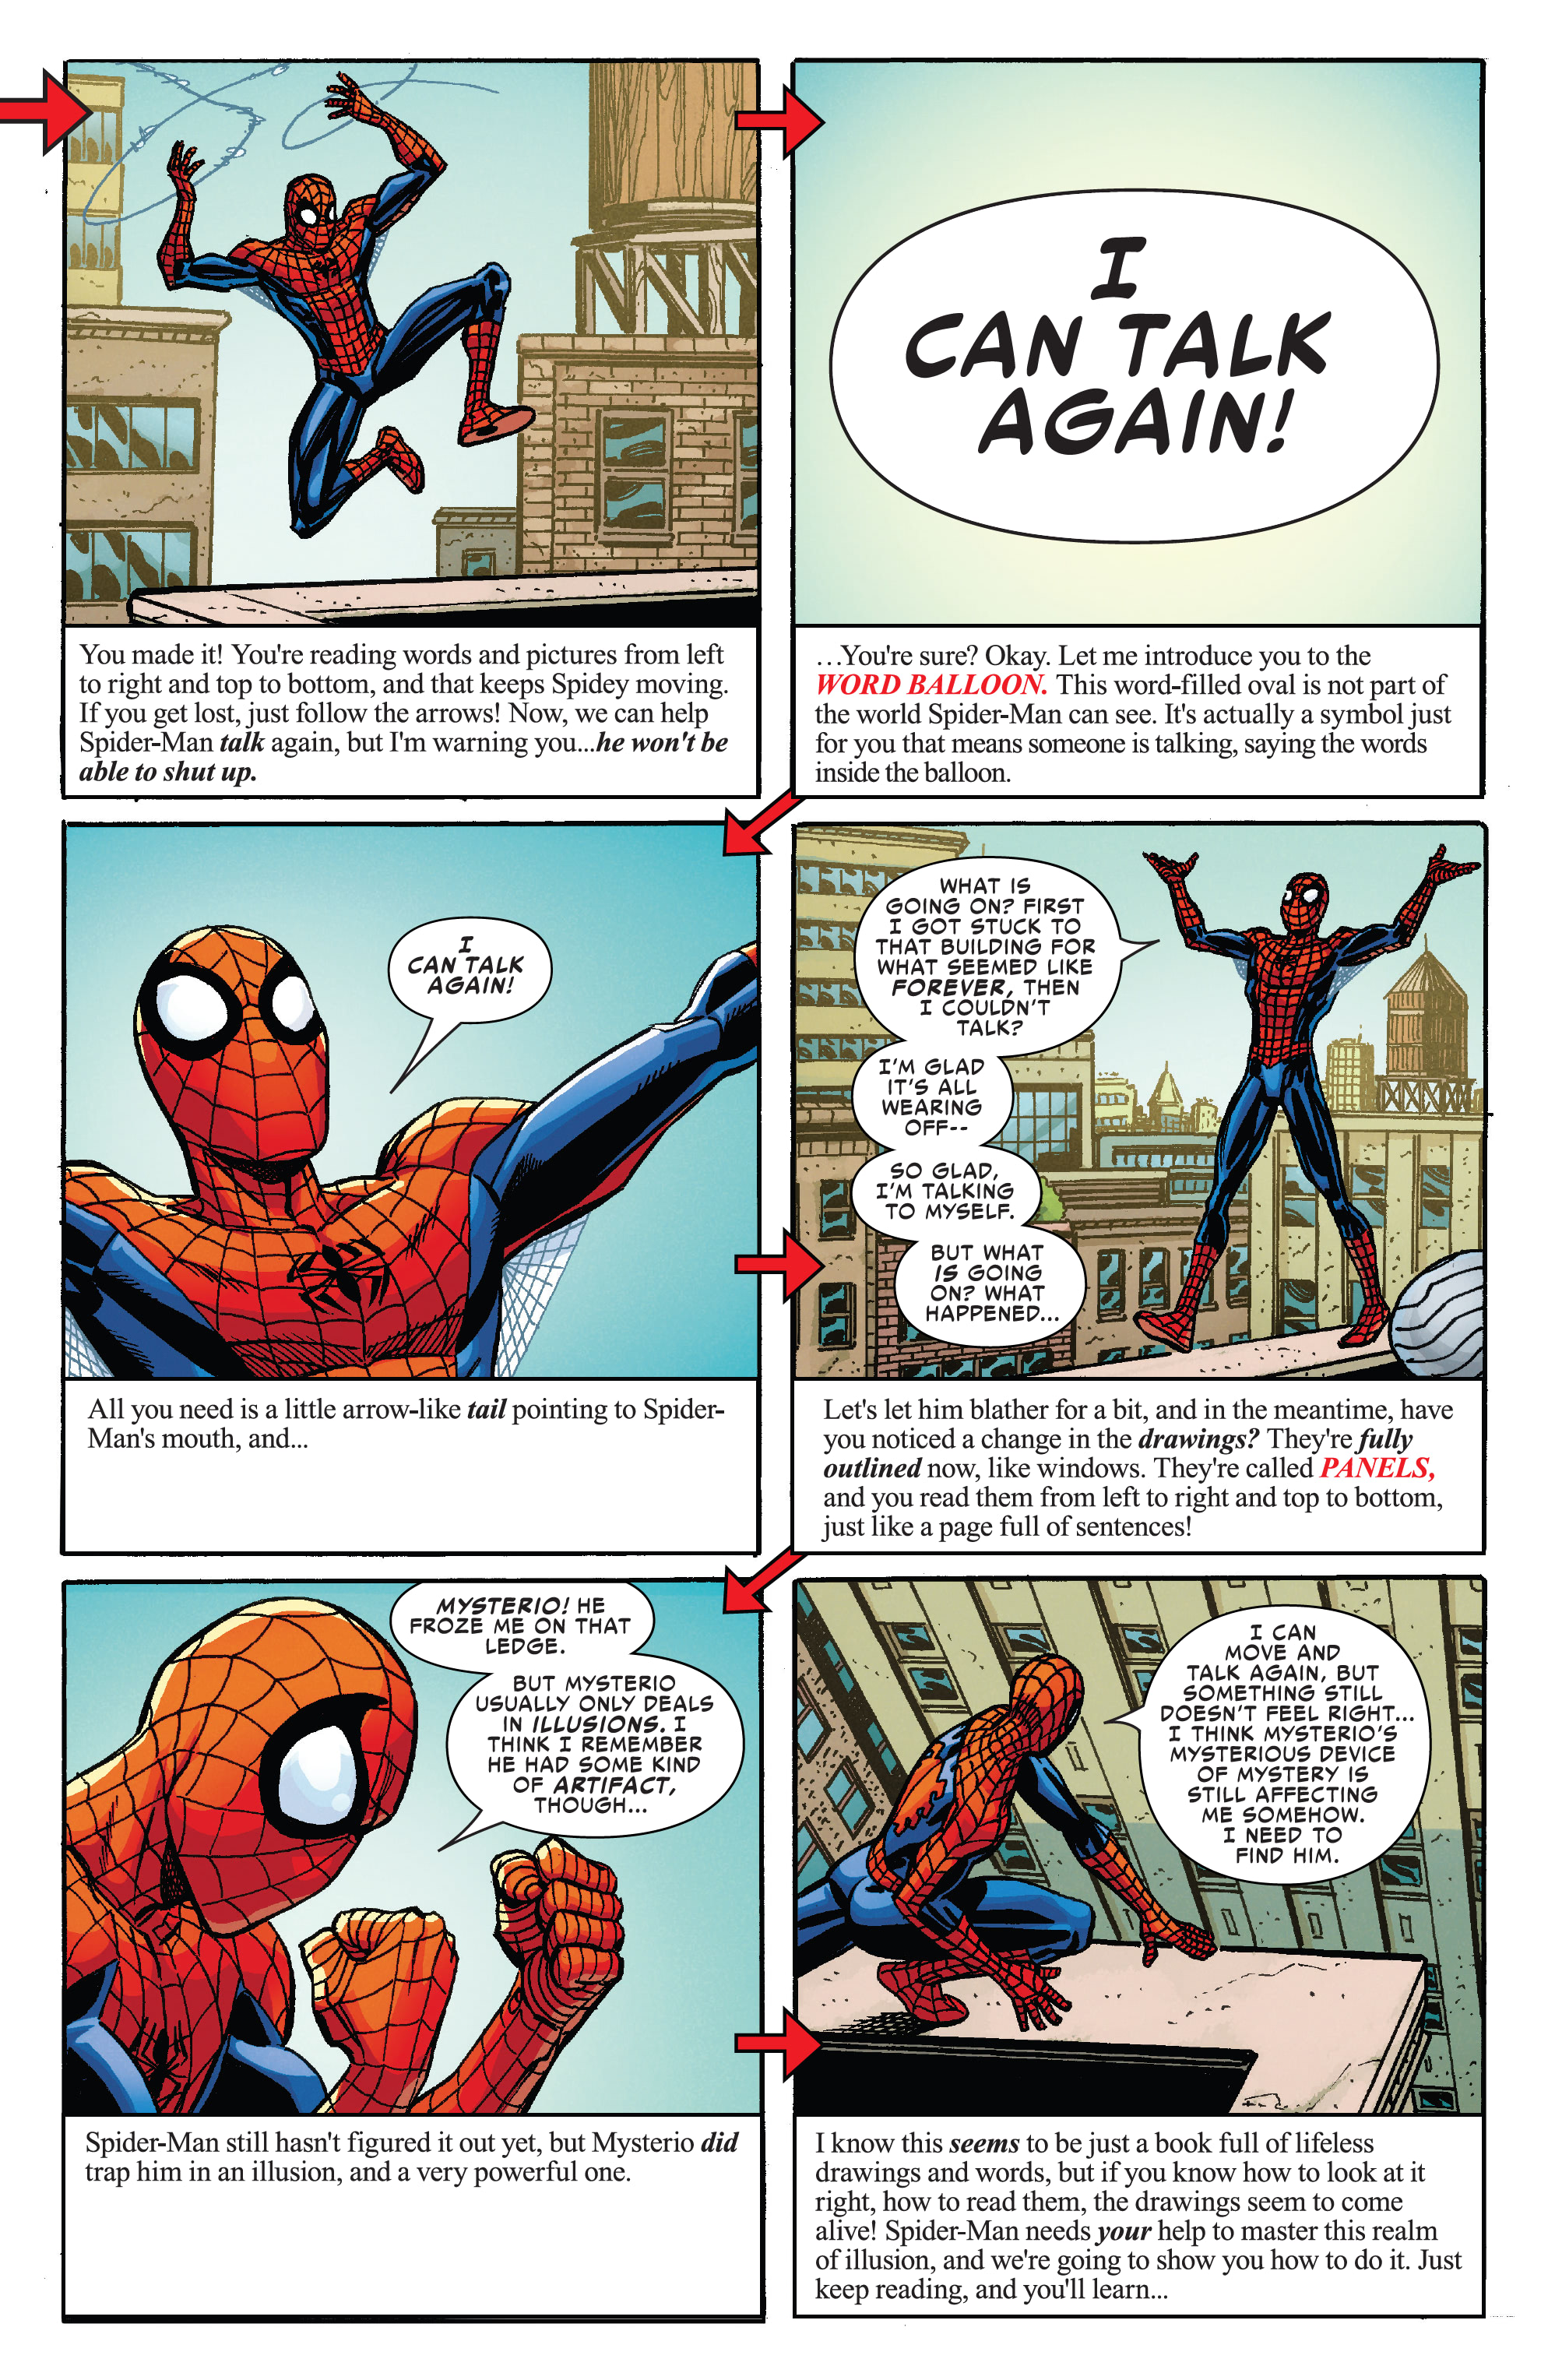 How To Read Comics The Marvel Way (2021): Chapter 1 - Page 4